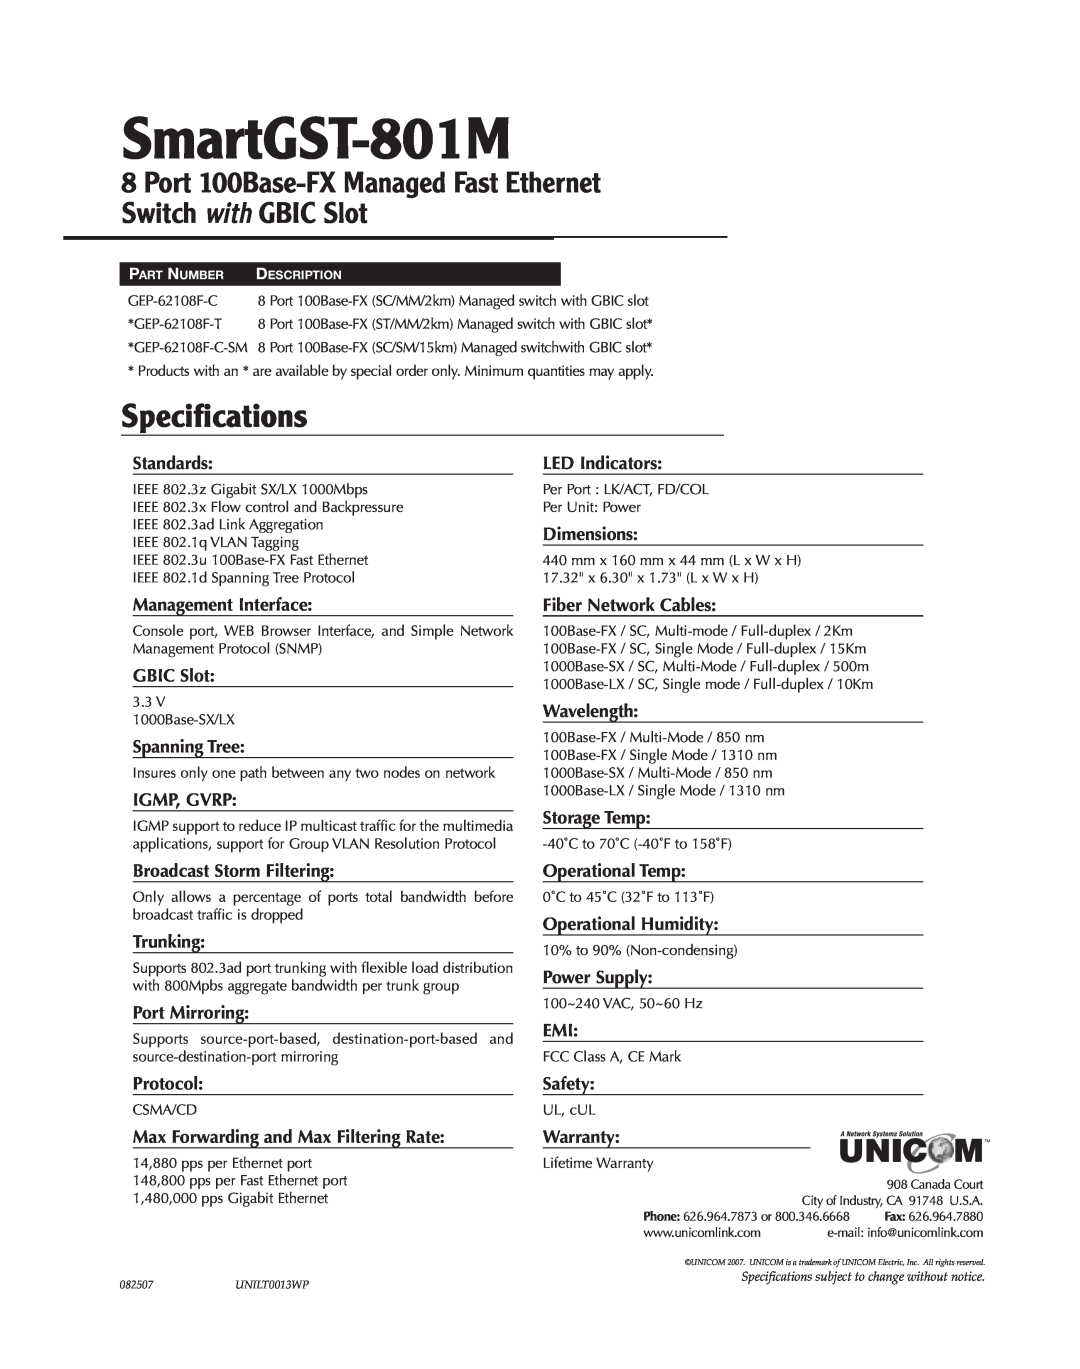 UNICOM Electric SmartGST-801M specifications Specifications, Port 100Base-FX Managed Fast Ethernet Switch with GBIC Slot 